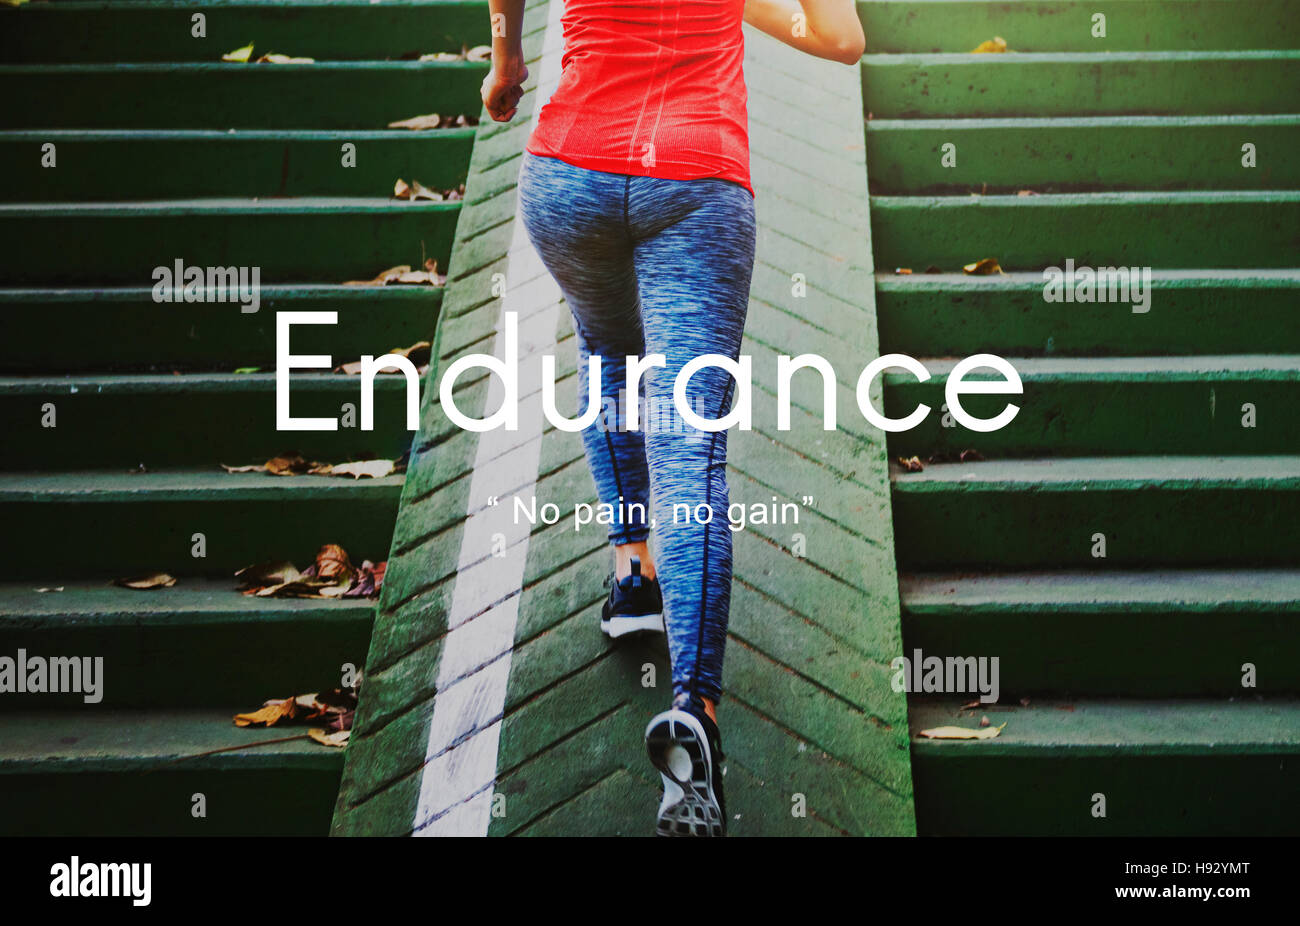 Endurance Strength Energize Stability Performance Concept Stock Photo